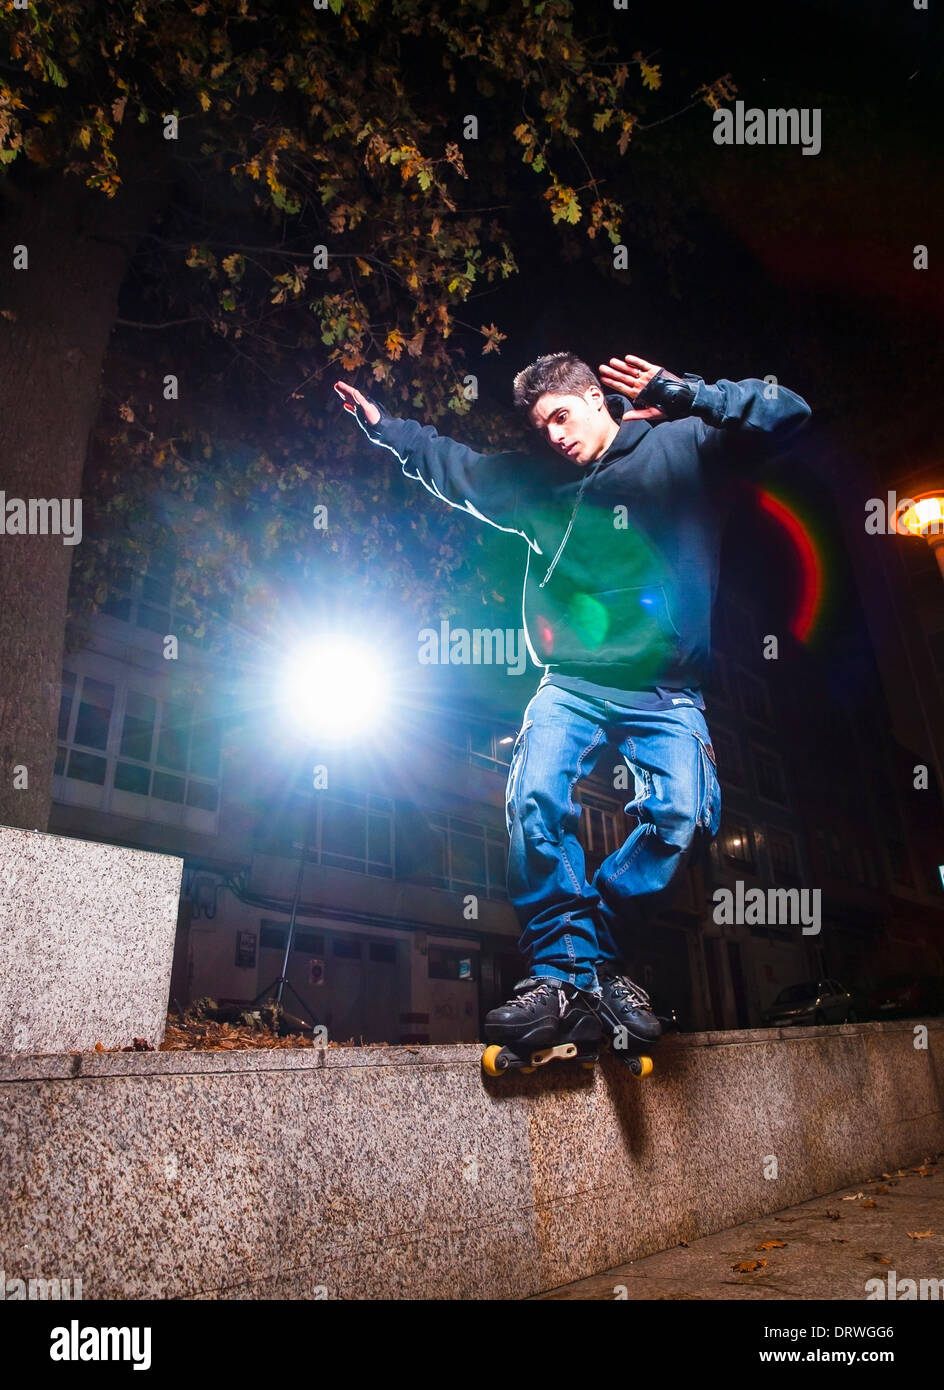 Young man practicing rollerskating. The young is grind a curb. Stock Photo